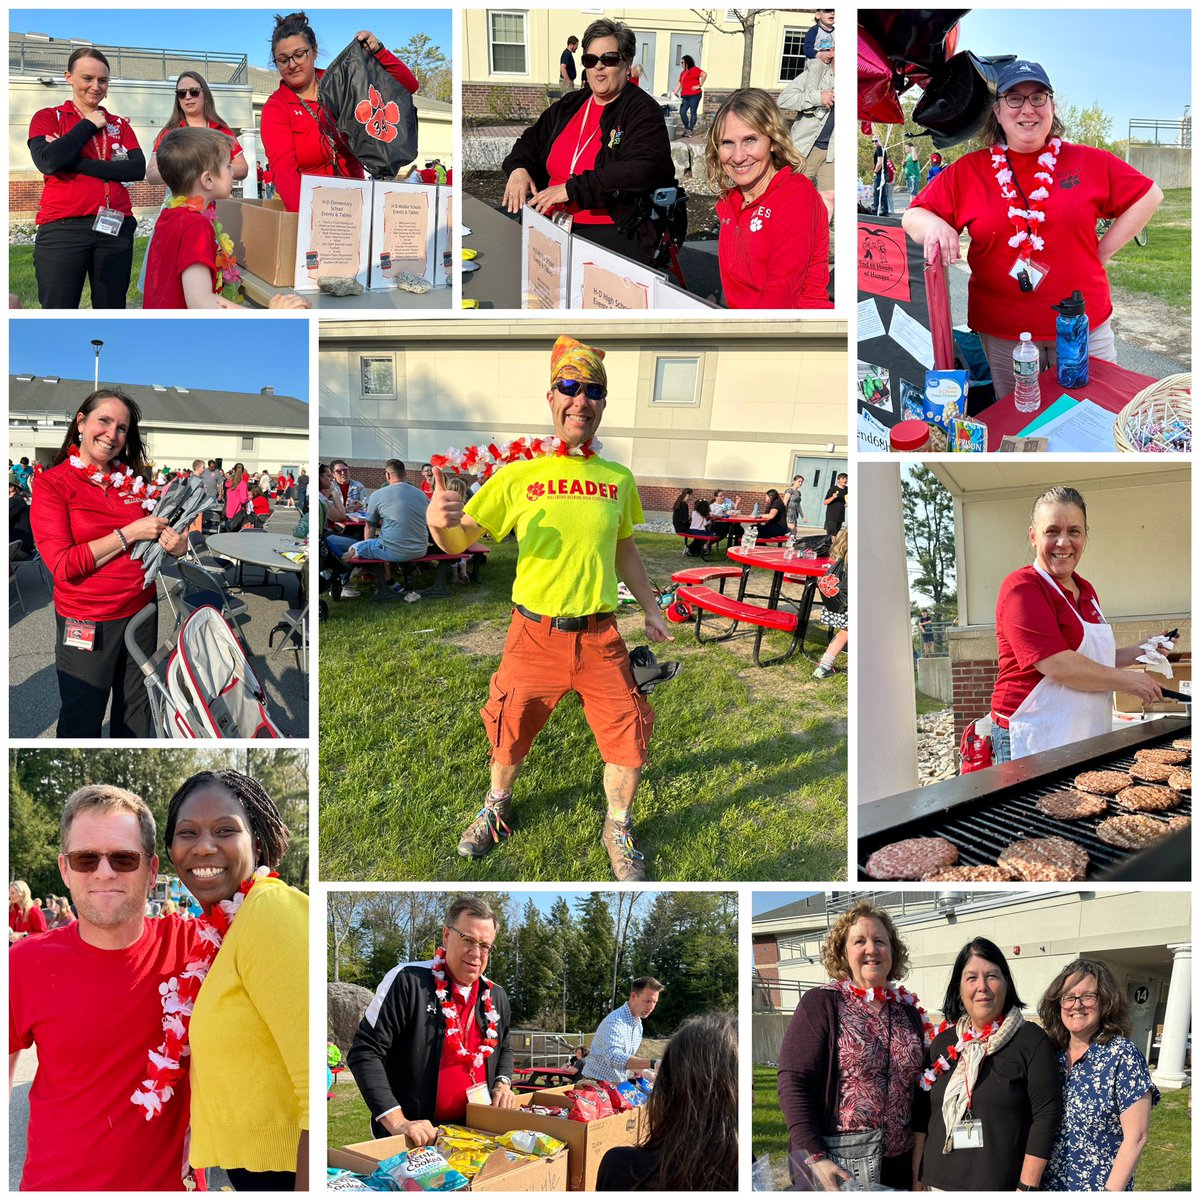 The 2nd Annual Family Fun Fest was another great success. We love serving the HDSD community! #hdsdpride #HDSDFunFest